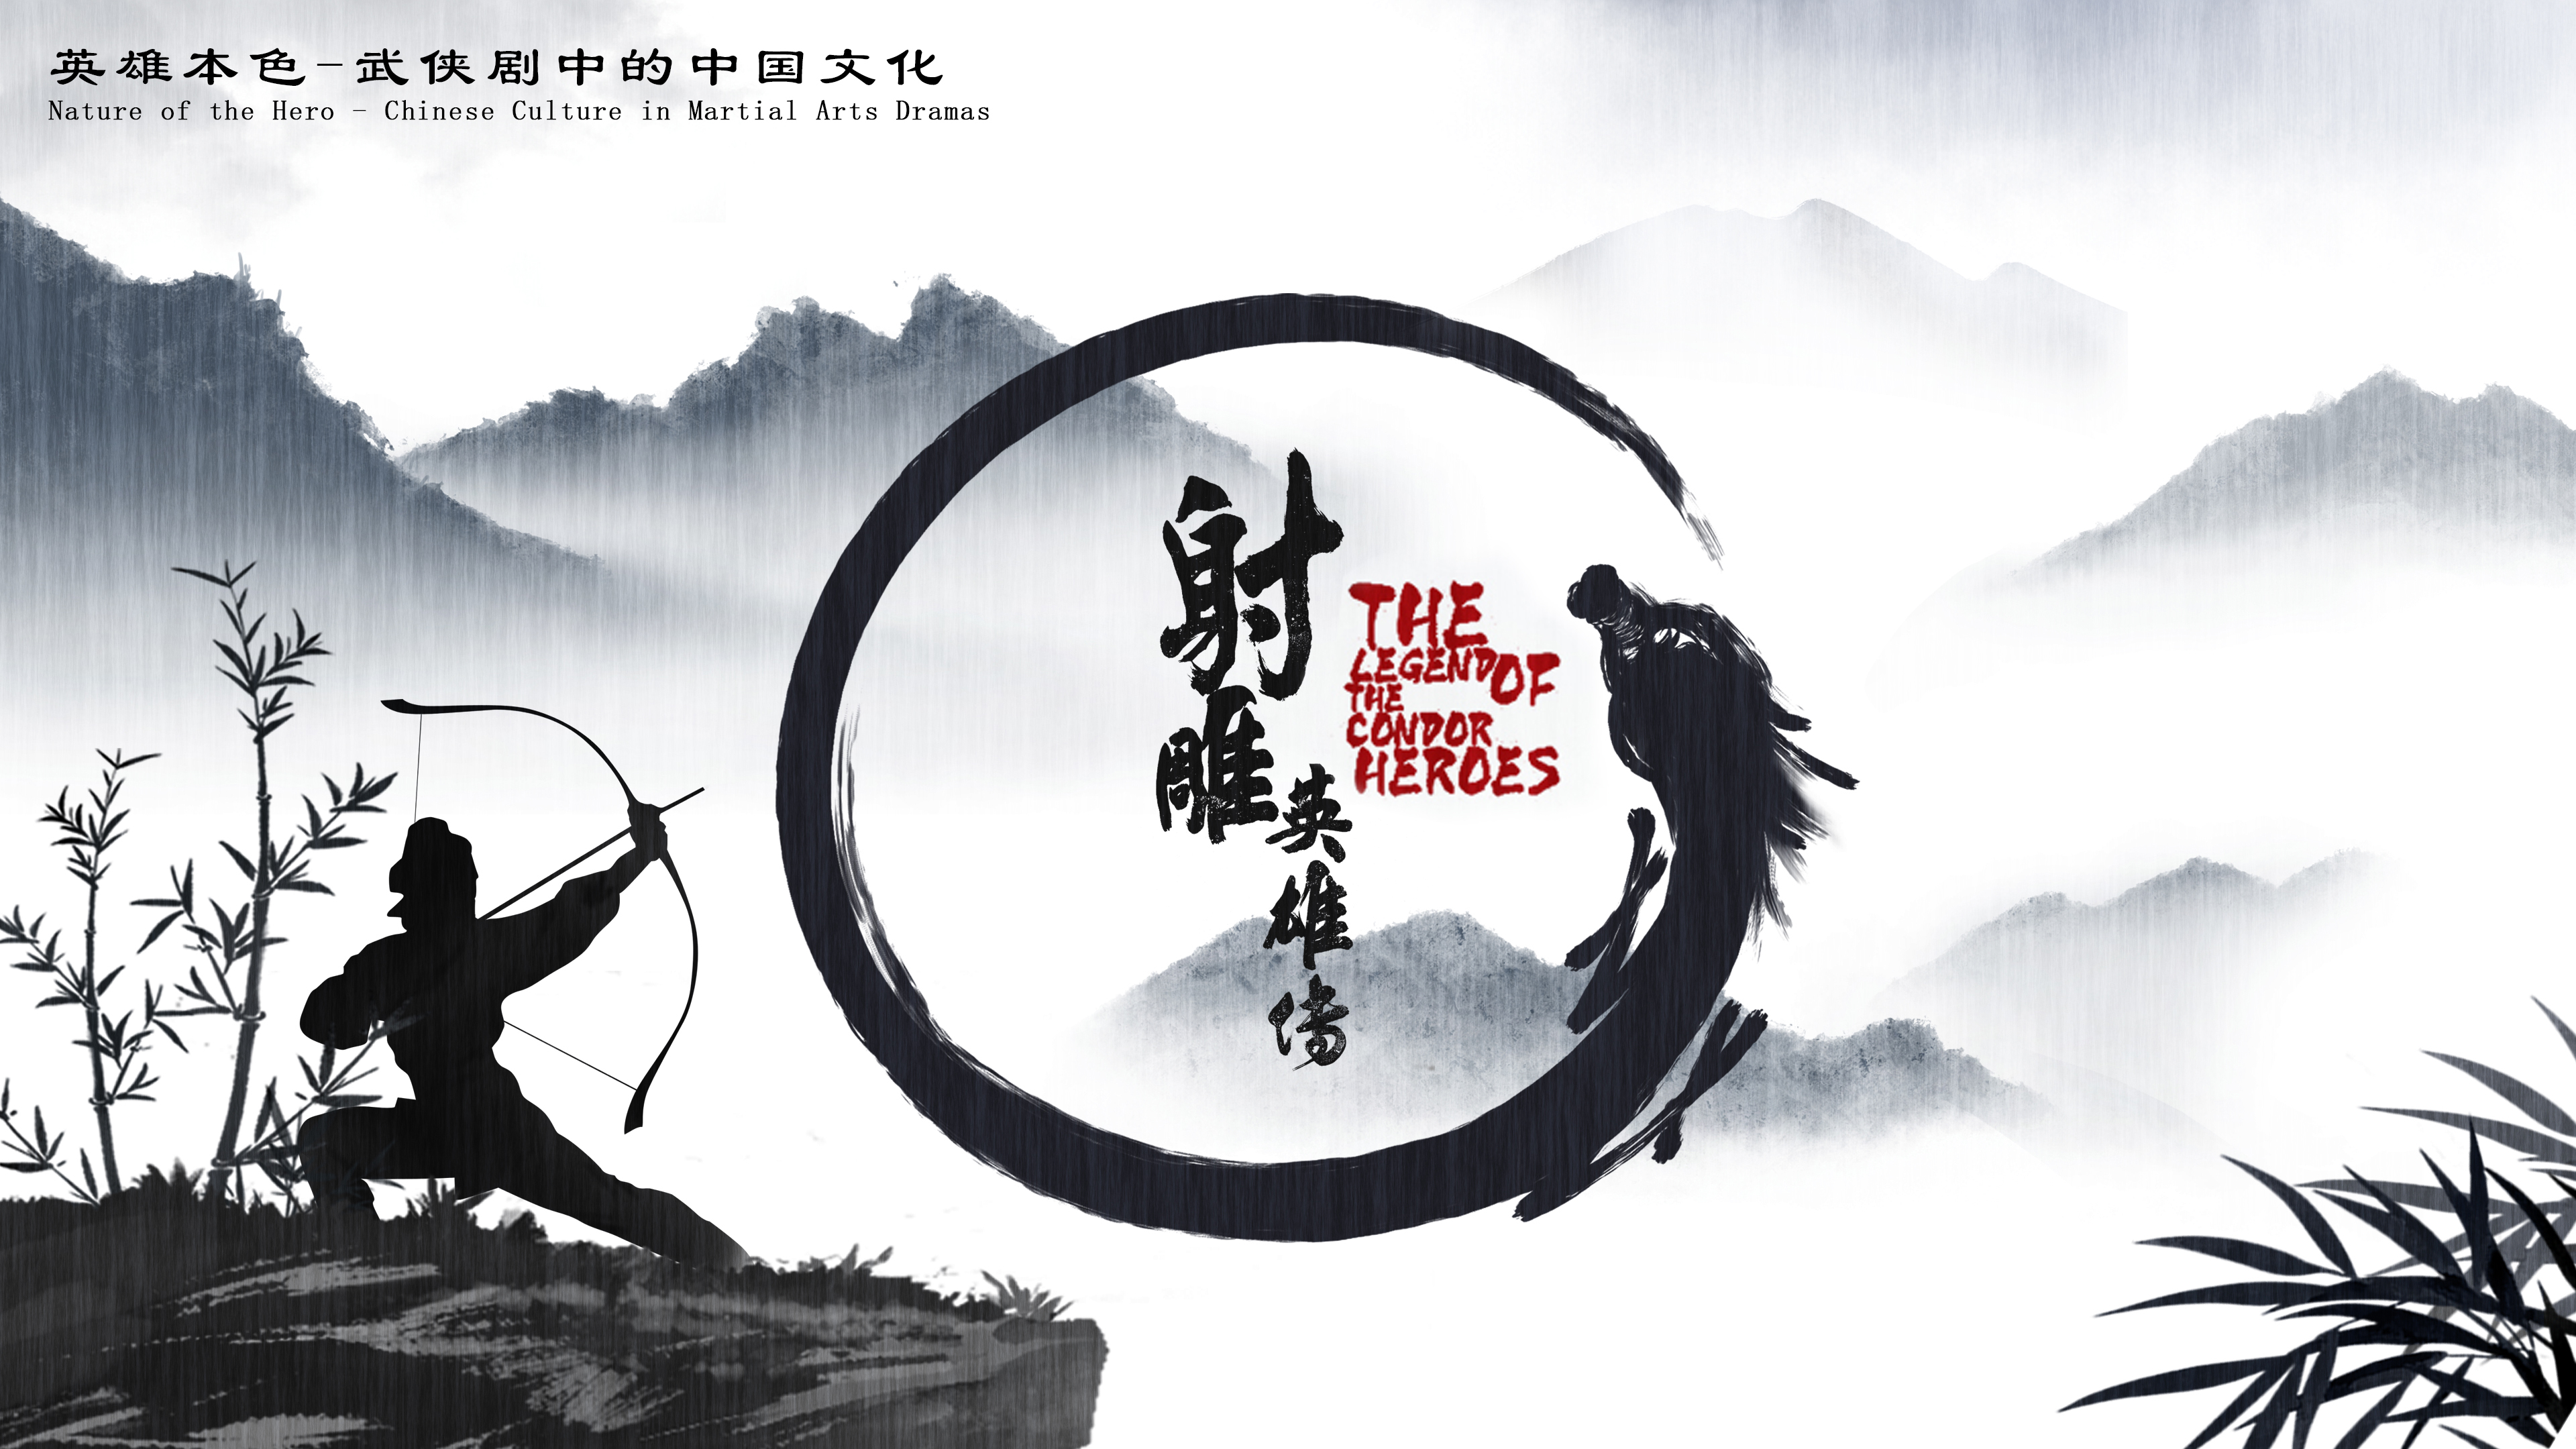 Nature of the Hero - Chinese Culture in Martial Arts Dramas: Explanation of relevant cultural contents of The Legend of the Condor Heroes